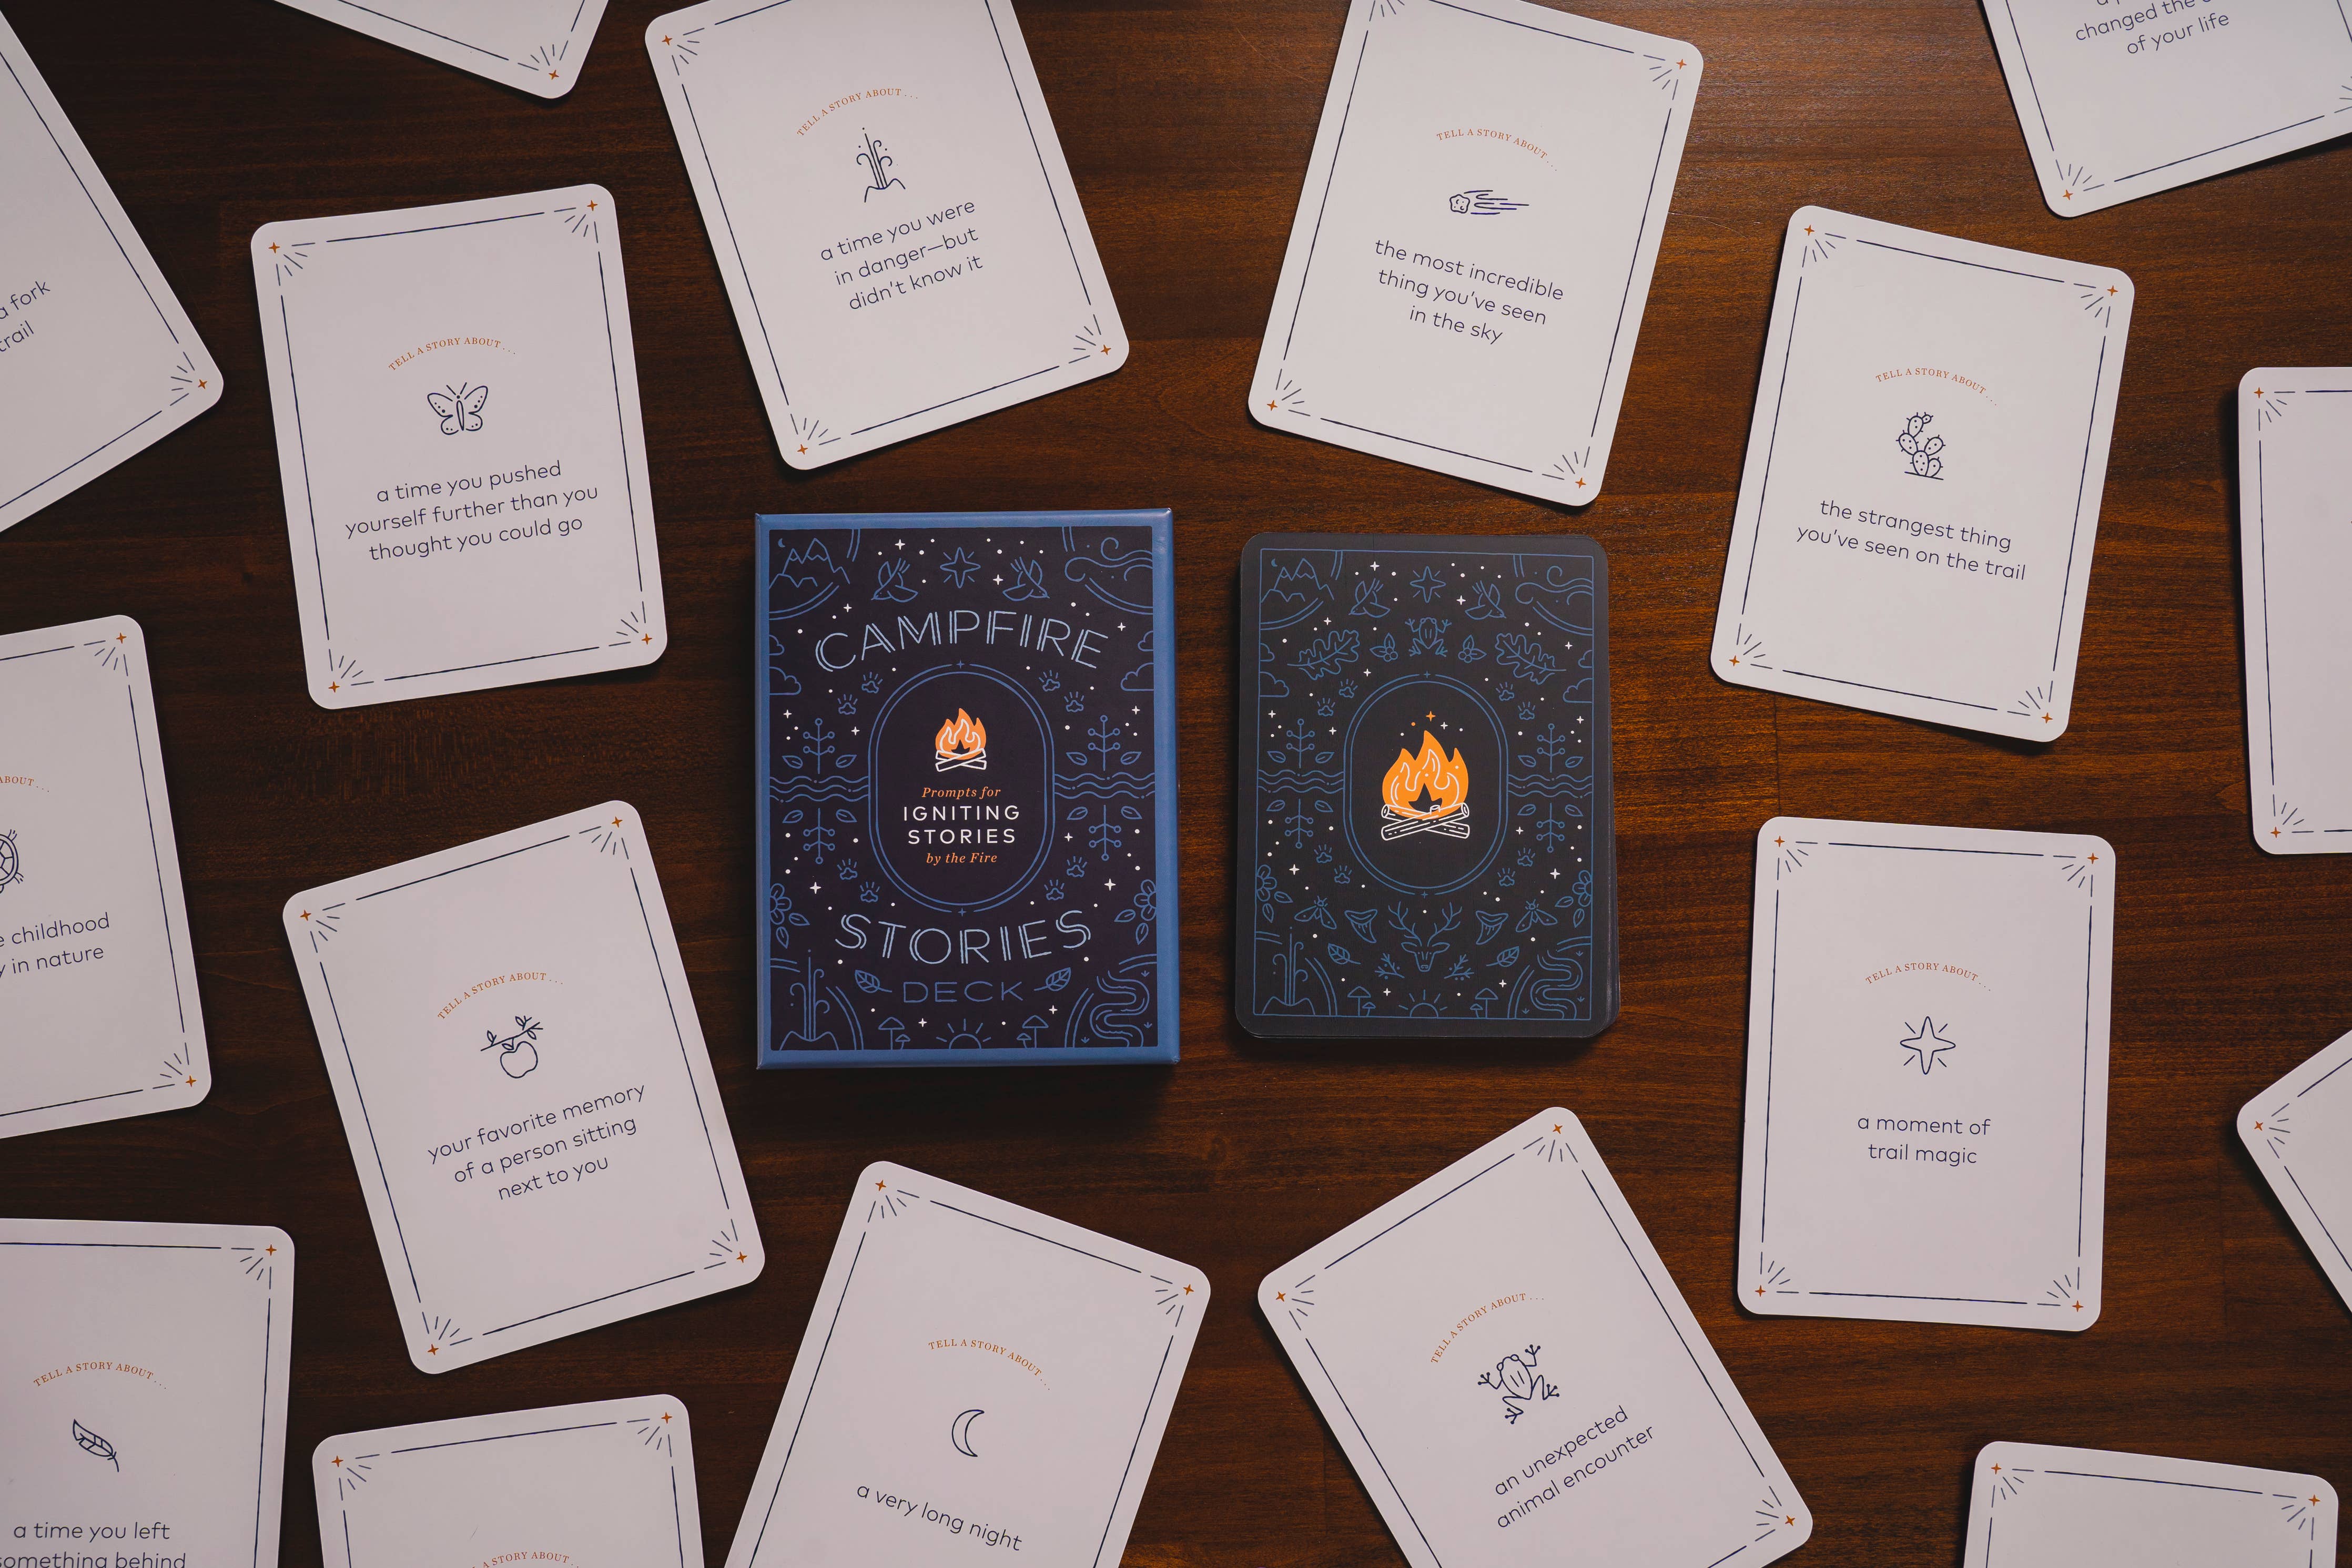 Campfire Stories Deck: Prompts for Stories